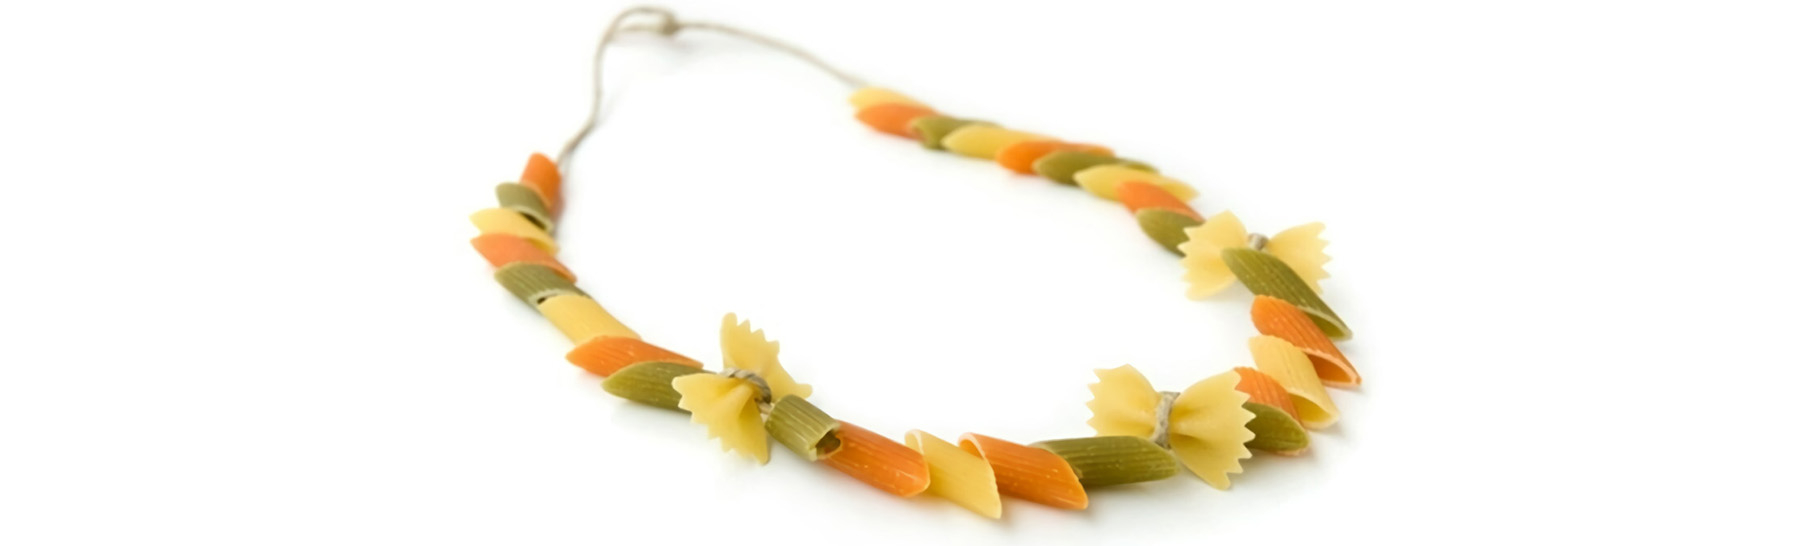  A necklace made out of pasta and stringed in an A B C pattern.